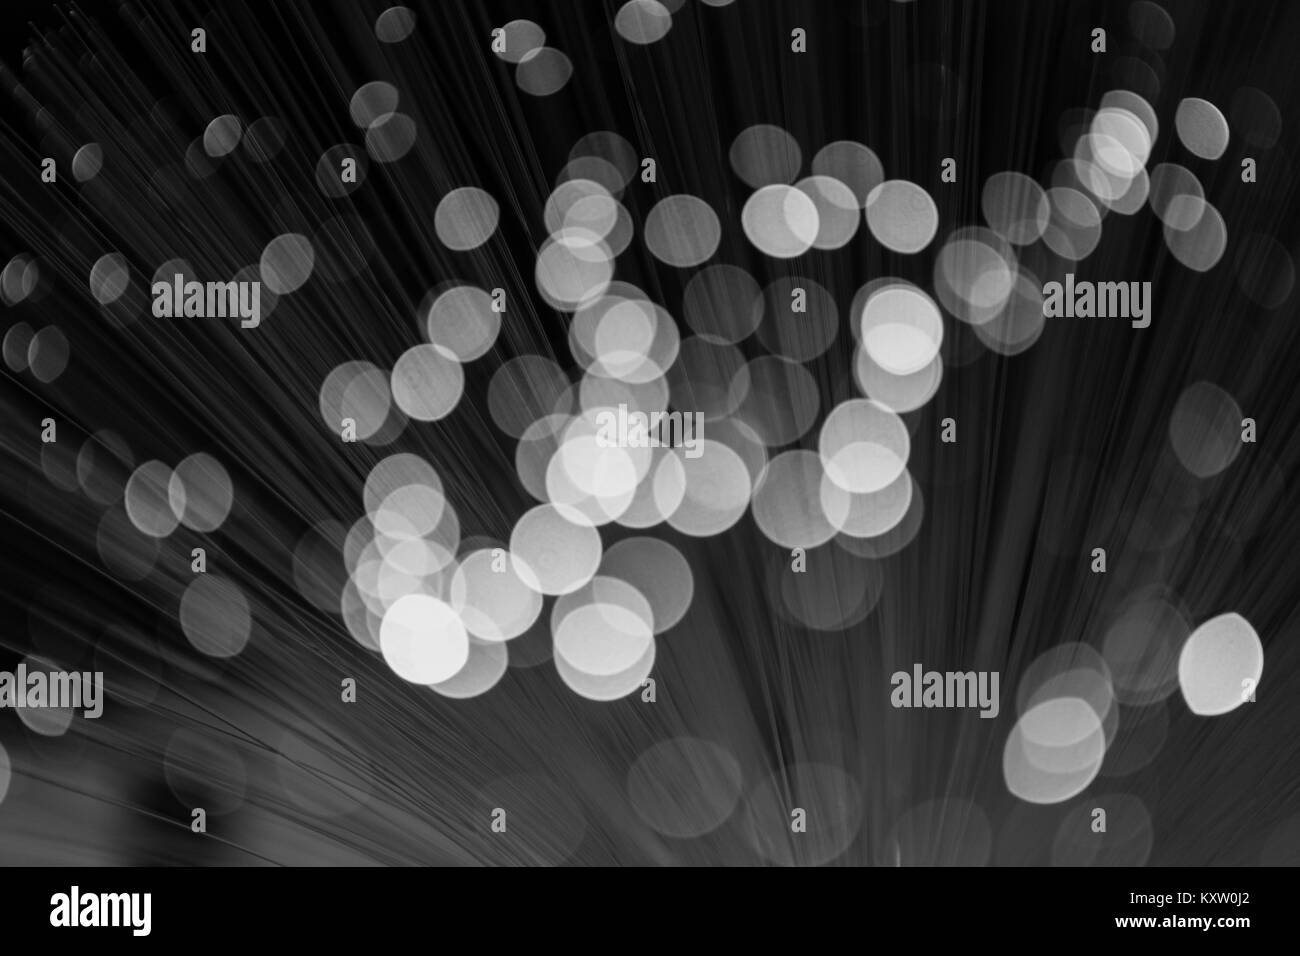 Abstract lights blurred background Stock Photo